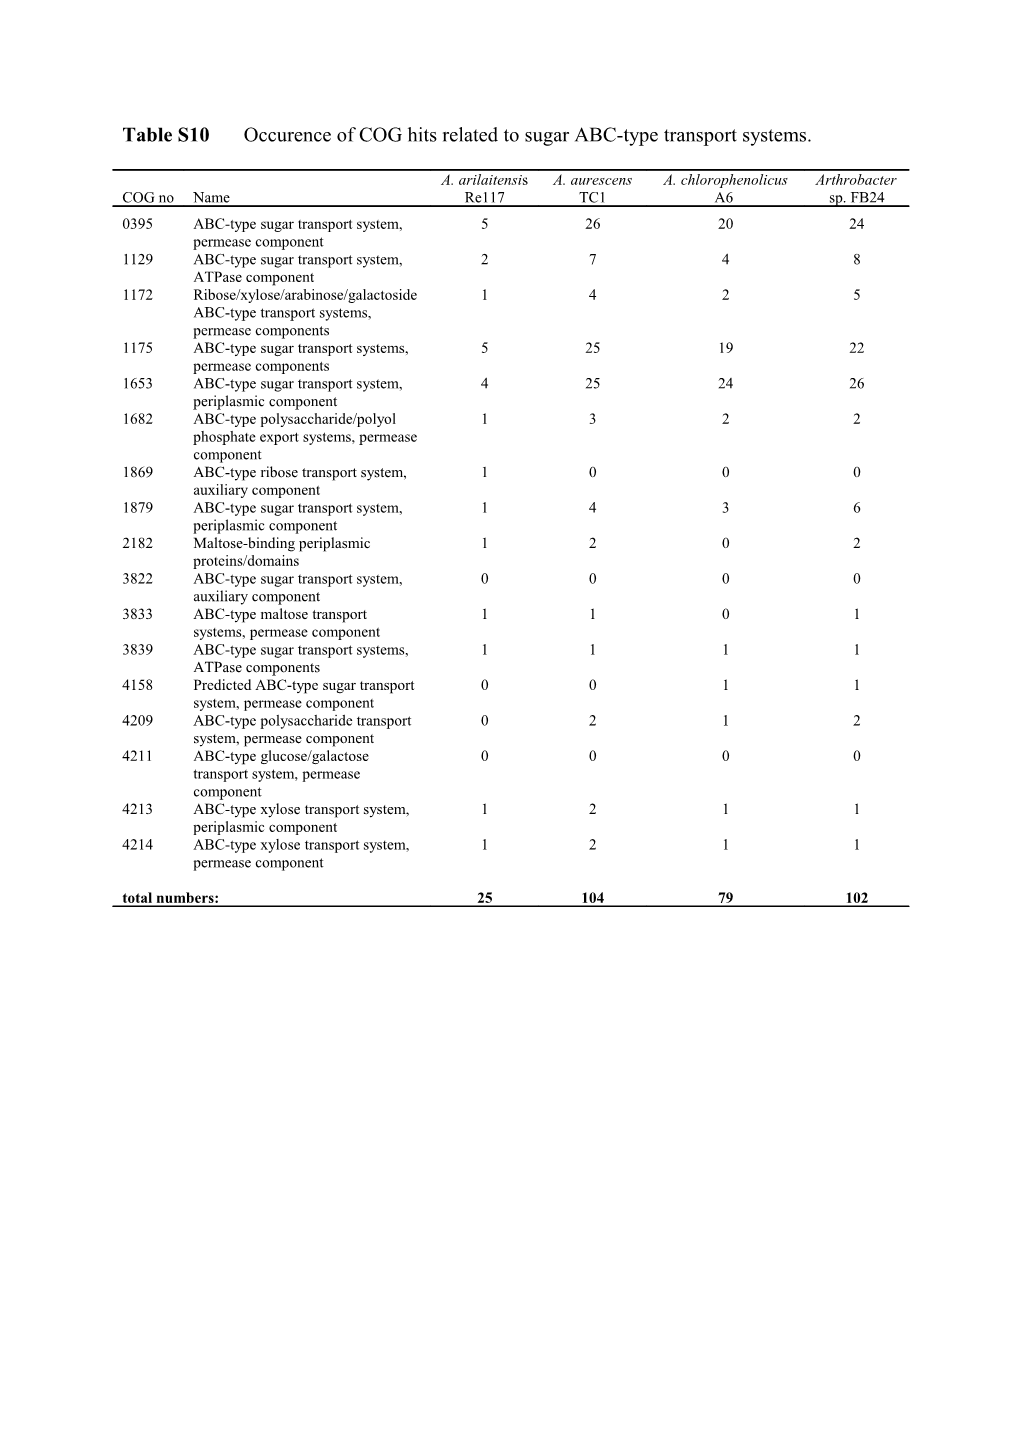 Table S10 Occurence of COG Hits Related to Sugar ABC-Type Transport Systems